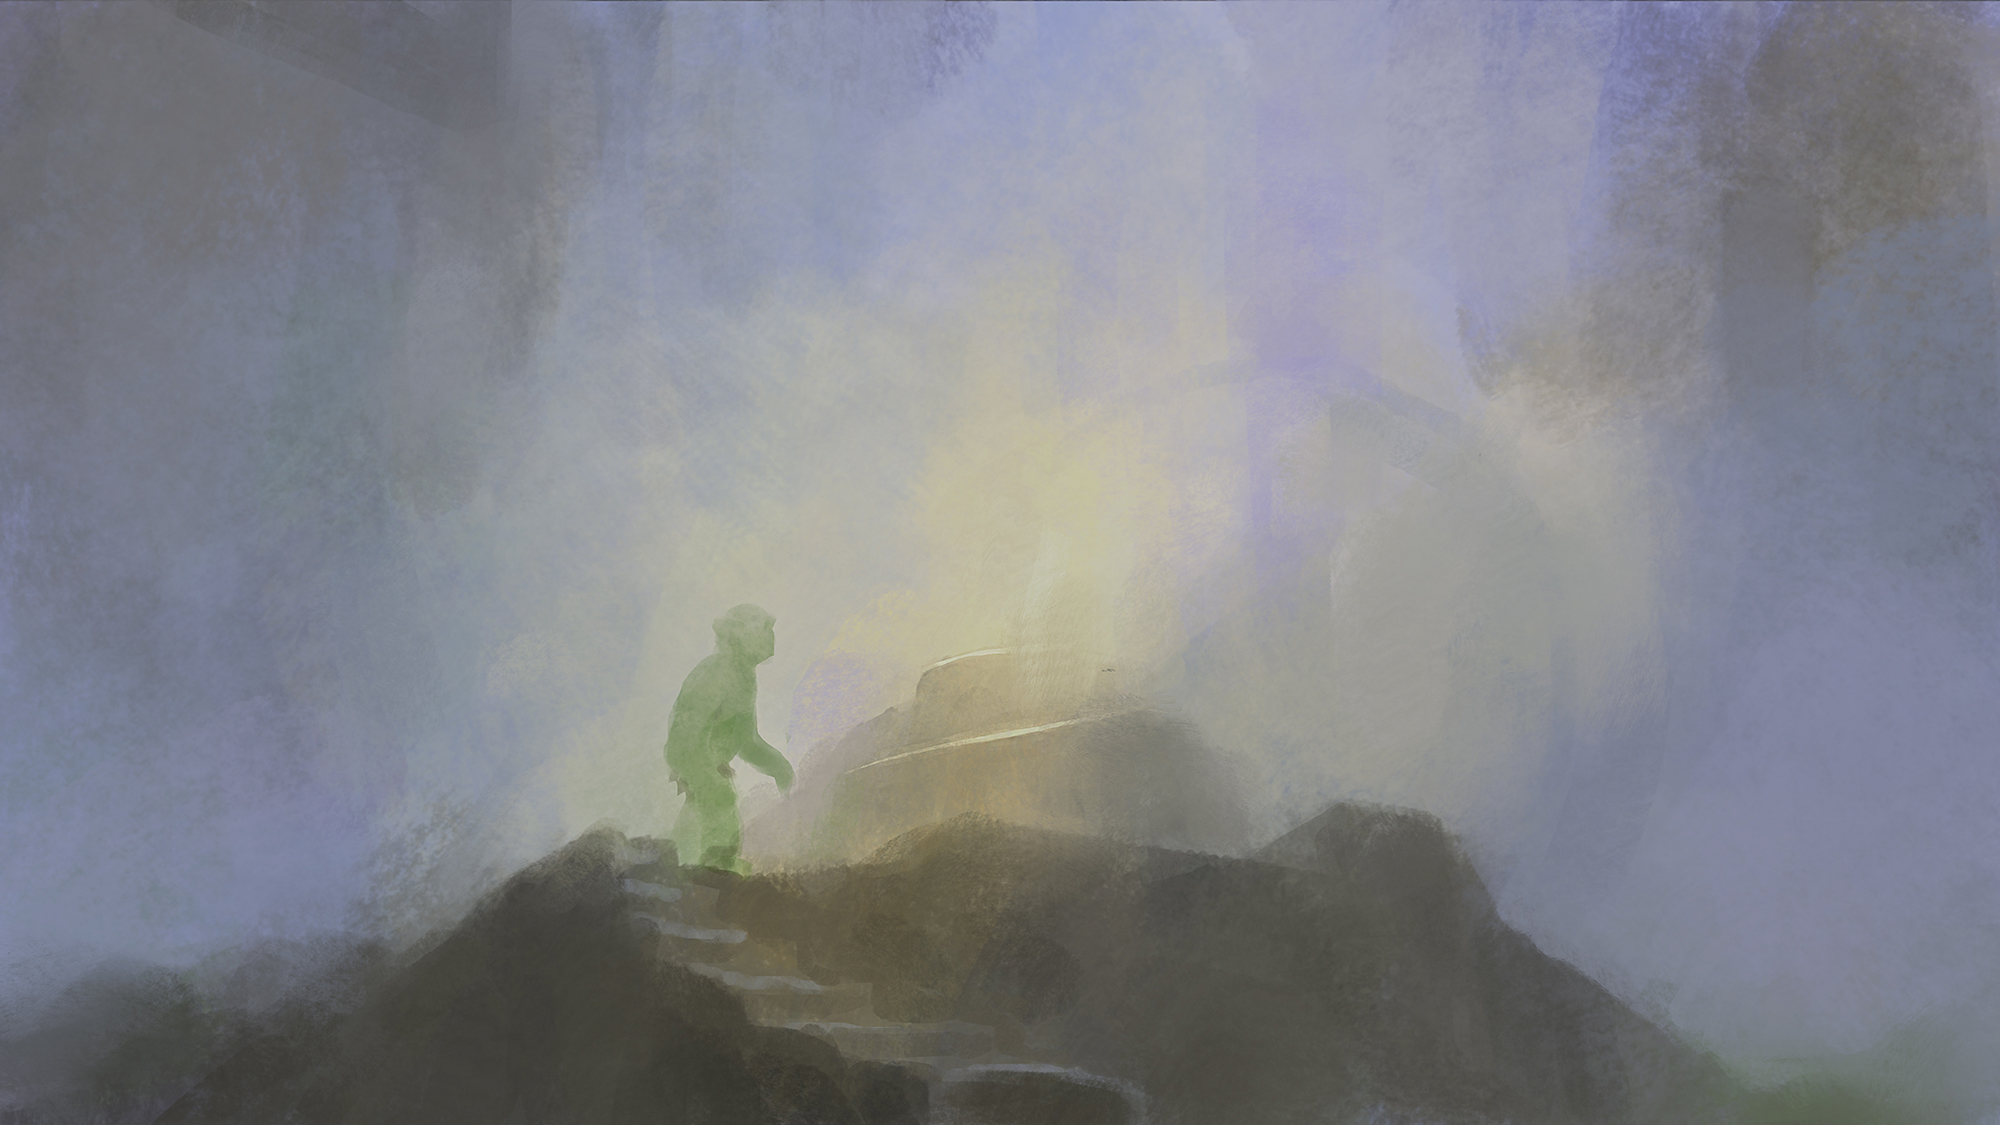 goblin character beside spinning rock sculpture with hazy smoke blue sky